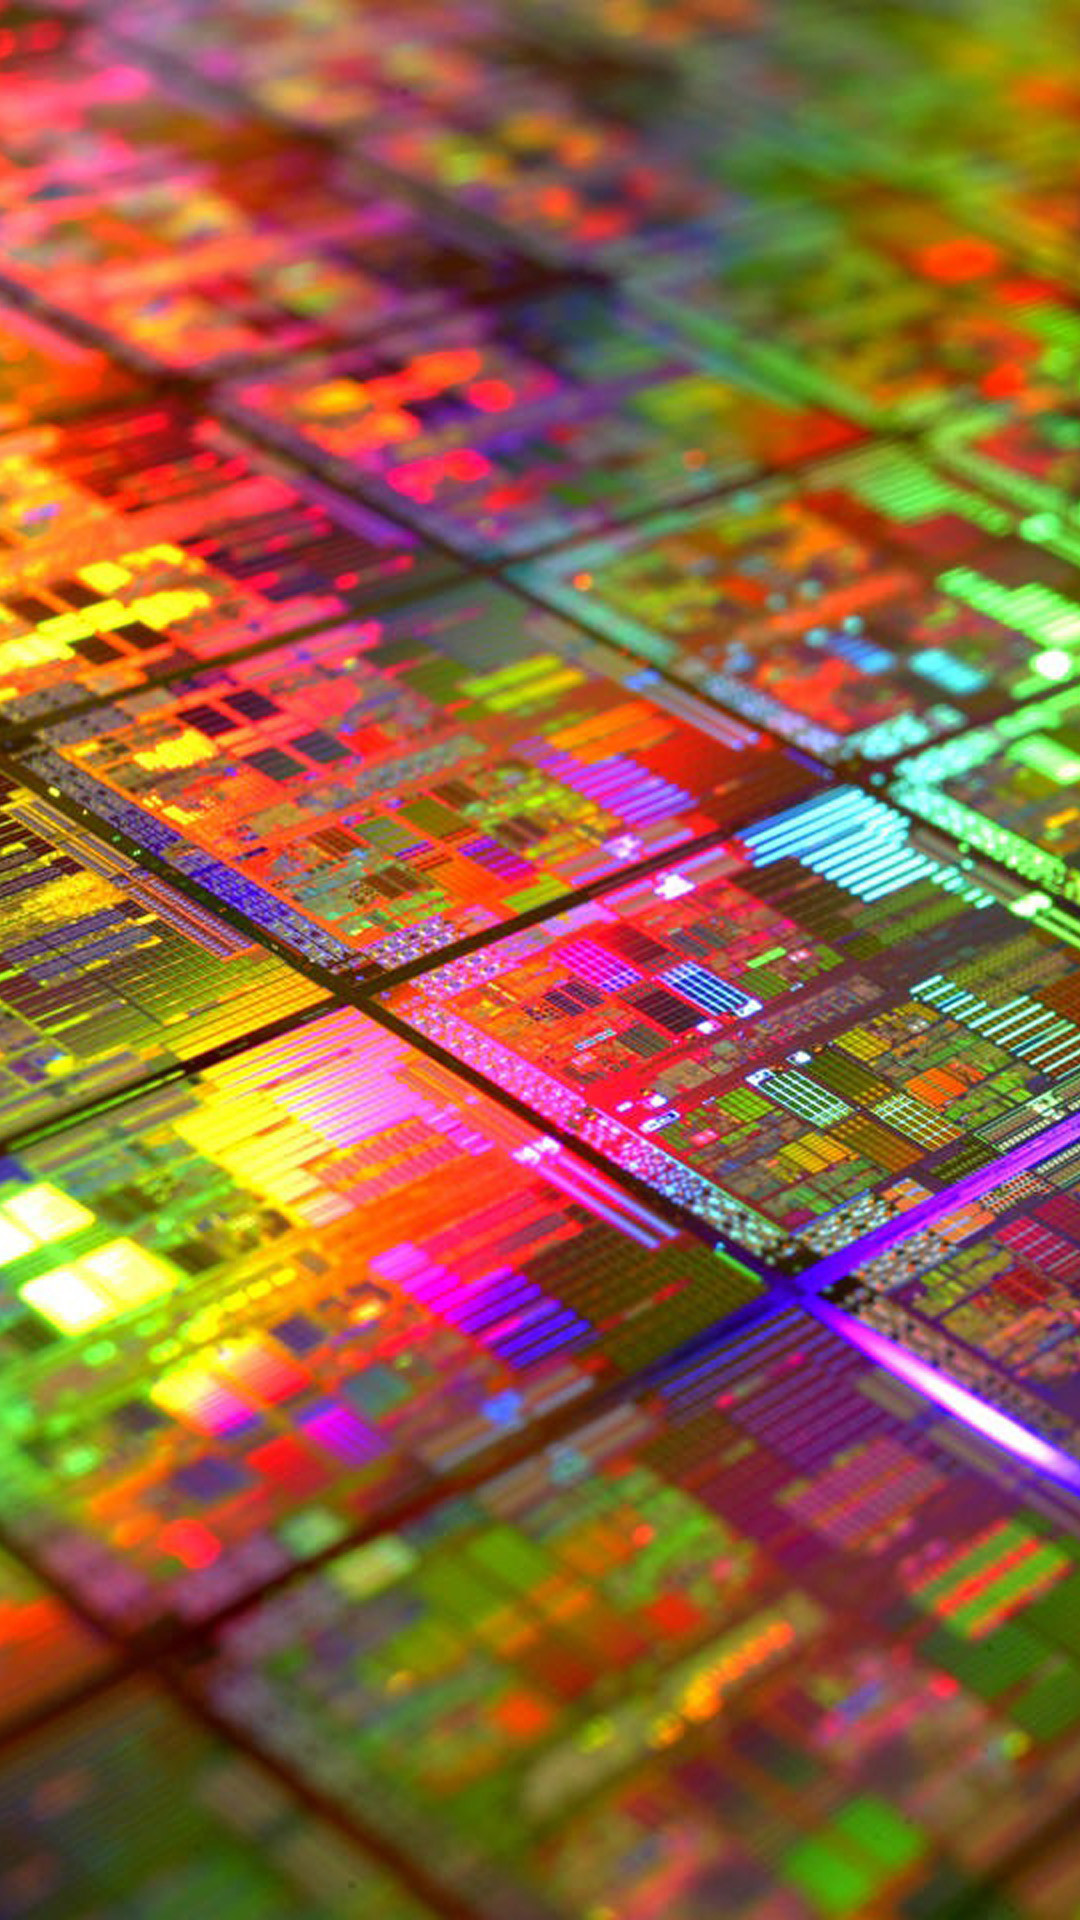 Circuit Board Hd Wallpaper Iphone 6 Plus Science Factory - Computer Chip Wafer - HD Wallpaper 